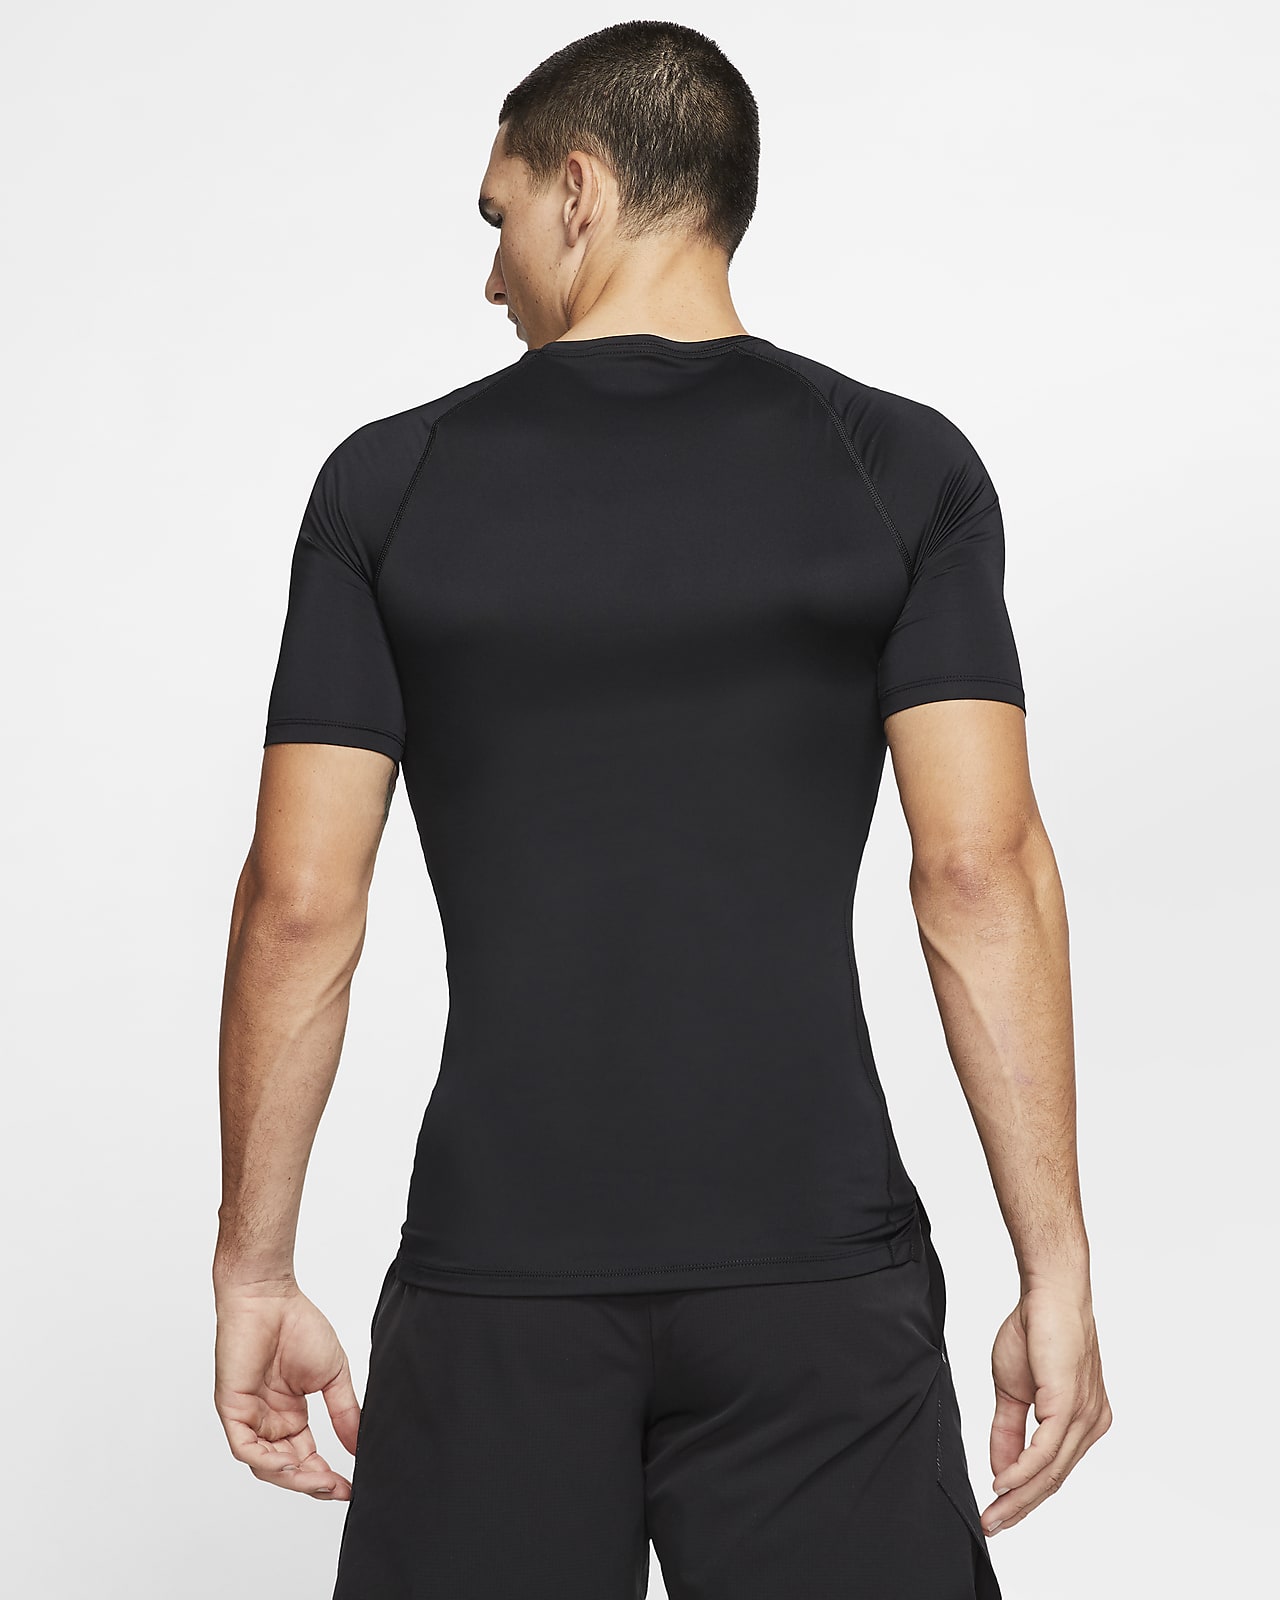 Tight-Fit Short-Sleeve Top. Nike GB